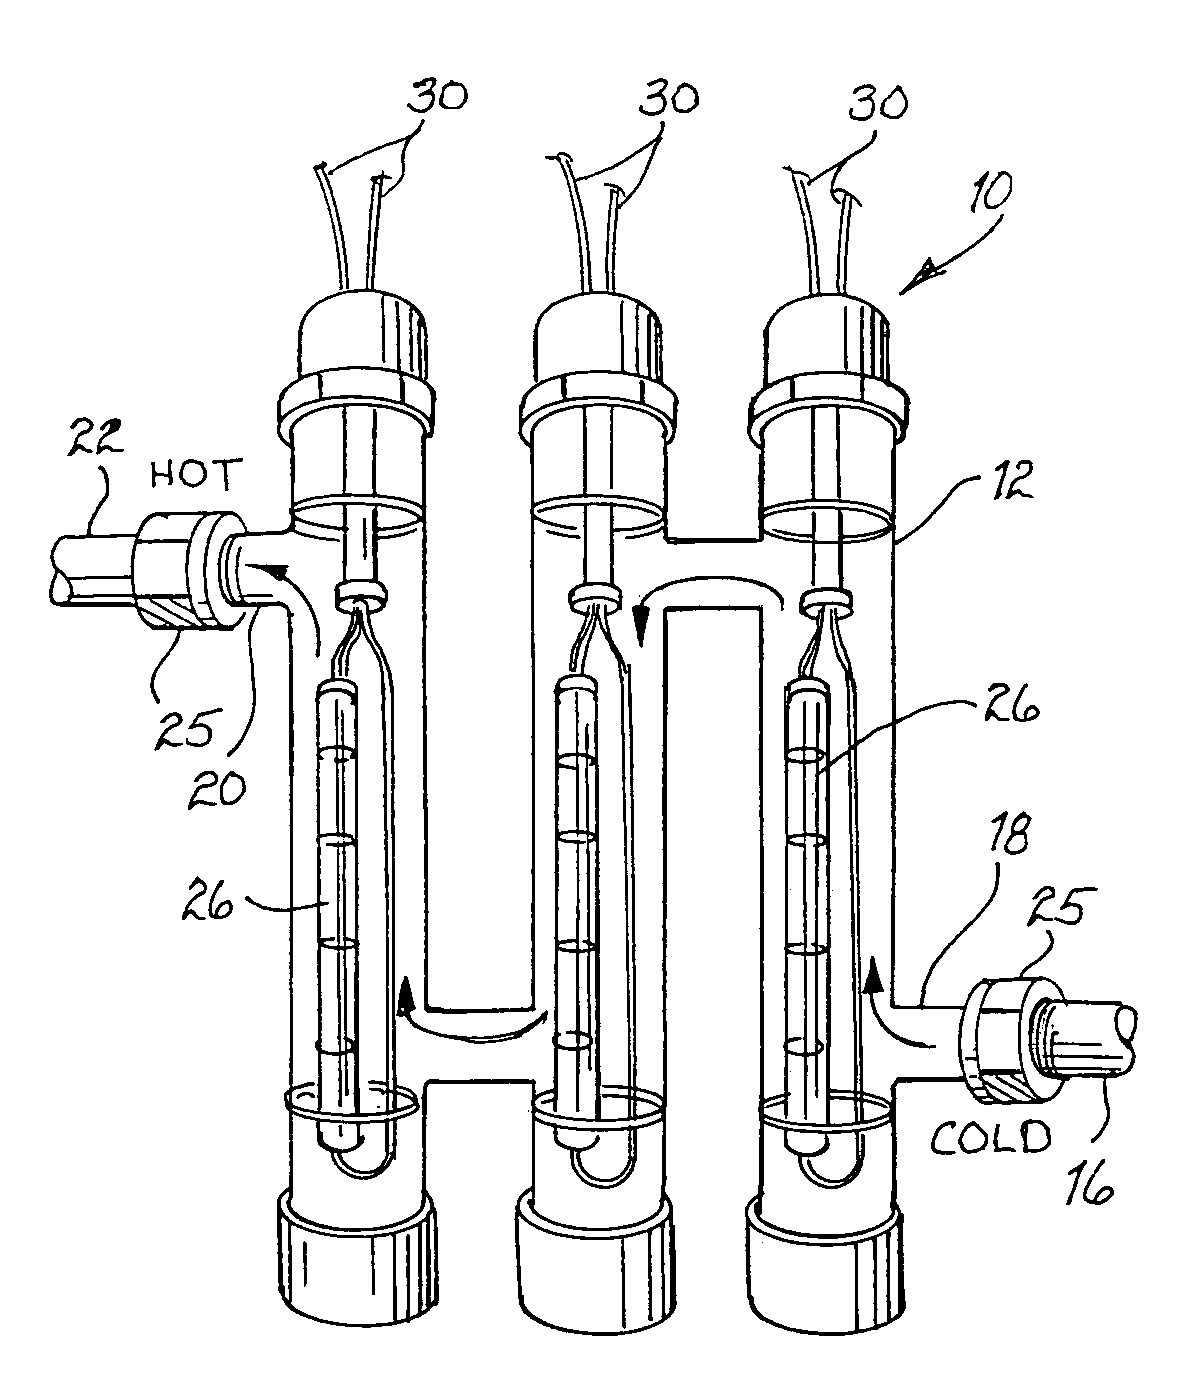 Energy efficient electric water heater system that provides immediate hot water at a point of use and a method therefor